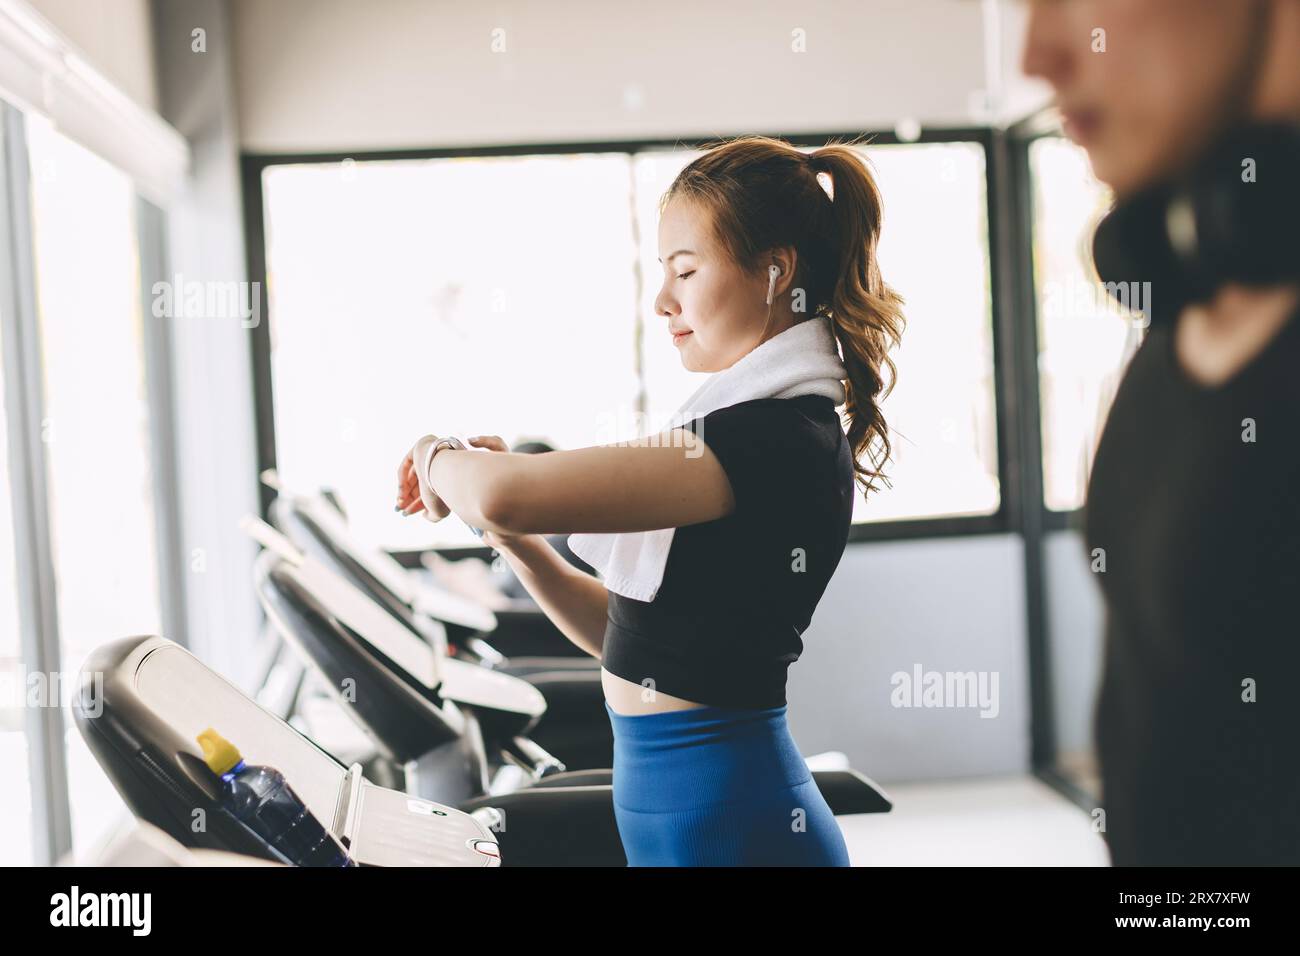 People running on a treadmill in health club using Smart Watch tracking pulse and training time for health goal Stock Photo